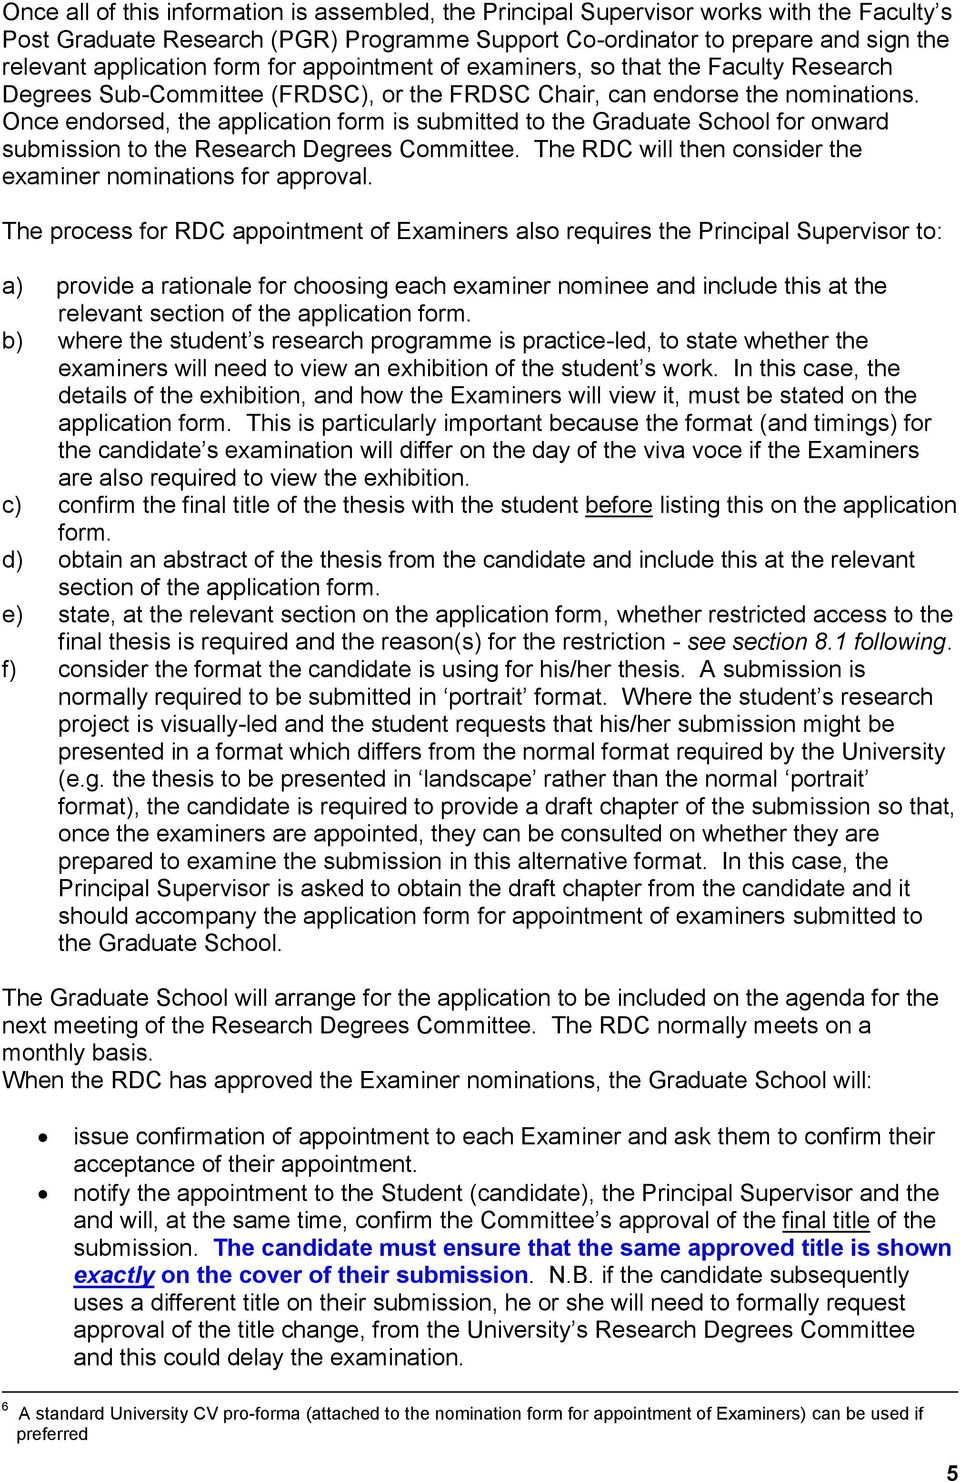 Once endorsed, the application form is submitted to the Graduate School for onward submission to the Research Degrees Committee. The RDC will then consider the examiner nominations for approval.